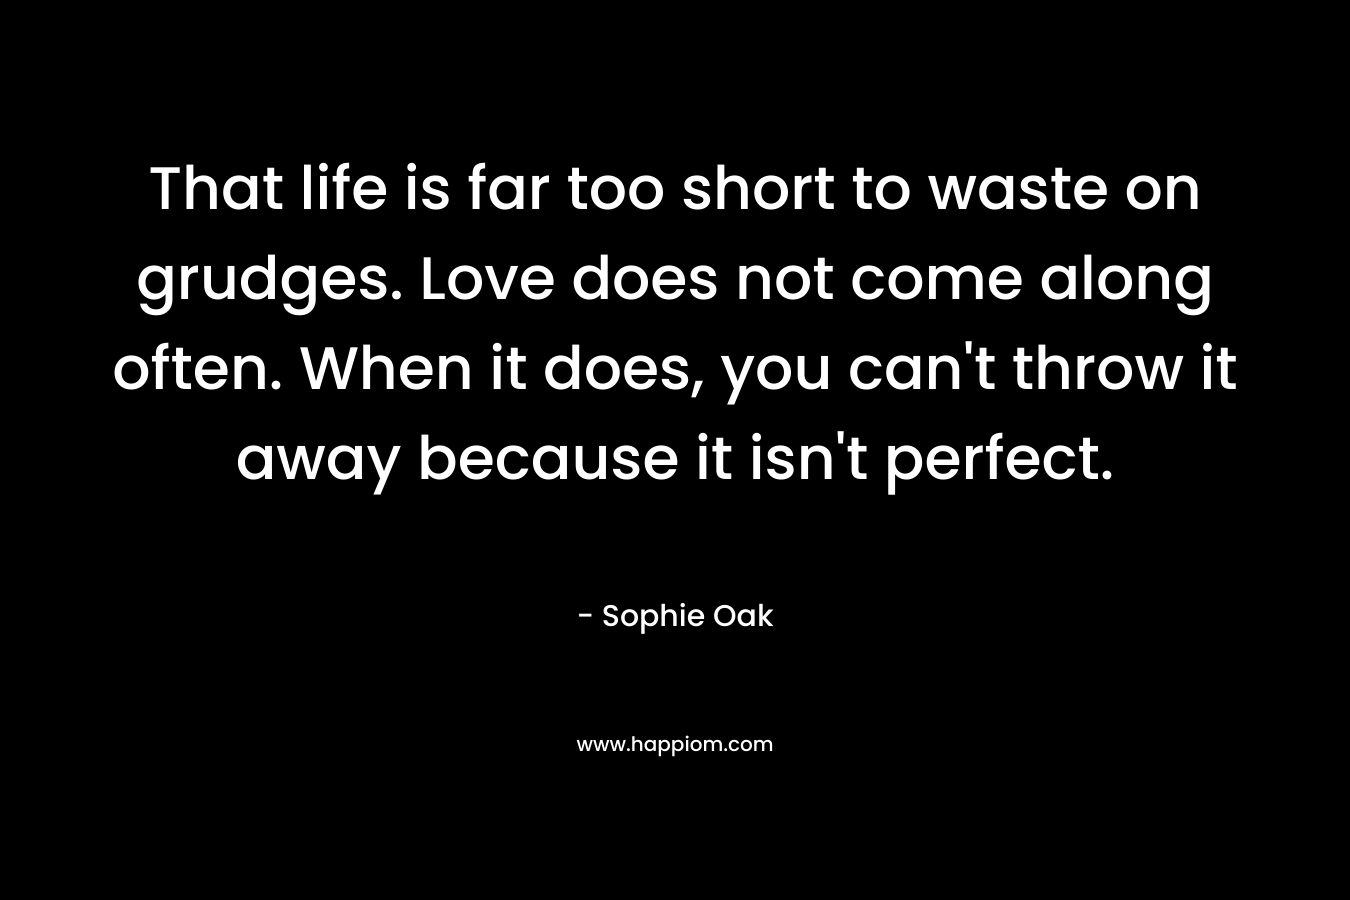 That life is far too short to waste on grudges. Love does not come along often. When it does, you can’t throw it away because it isn’t perfect. – Sophie Oak